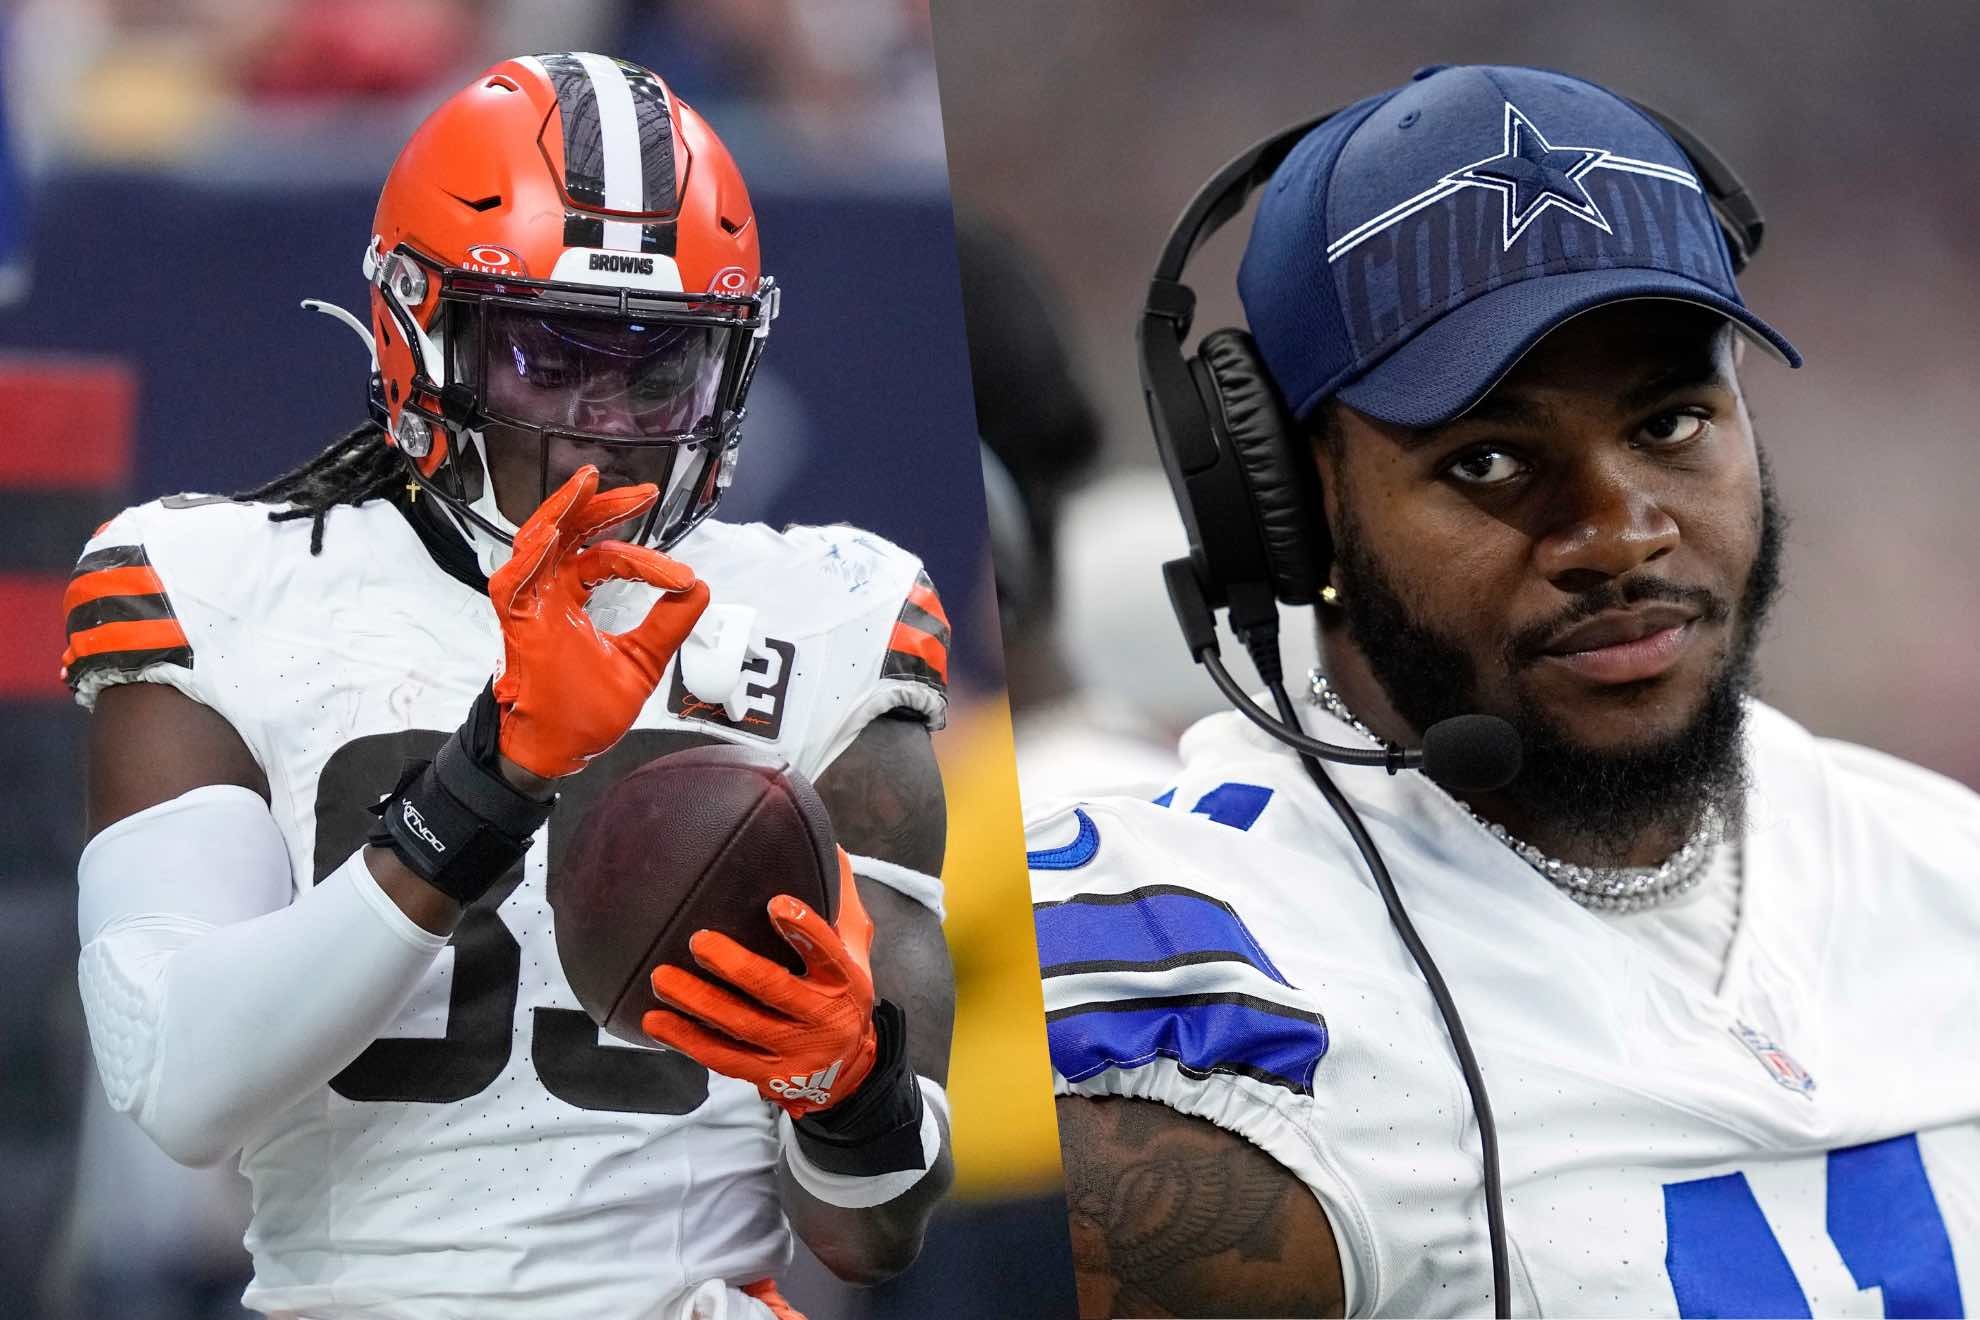 Micah Parsons made a controversial statement about David Njokus Cleveland Browns